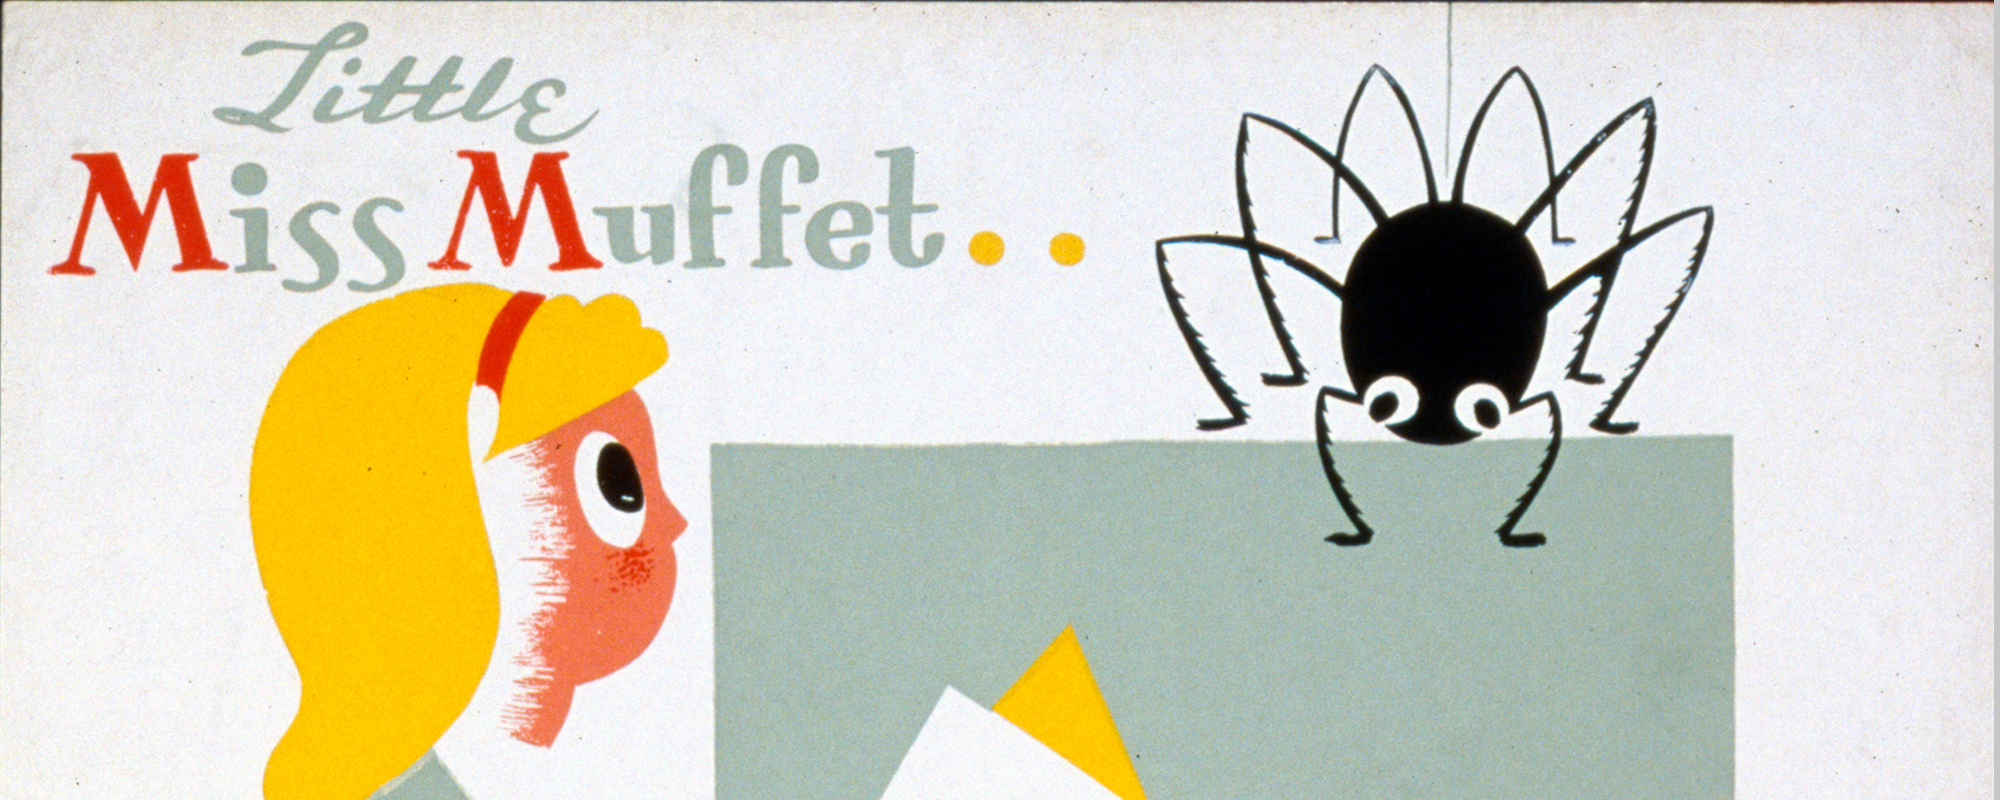 The Meaning Behind the Cheesy Nursery Rhyme “Little Miss Muffet”